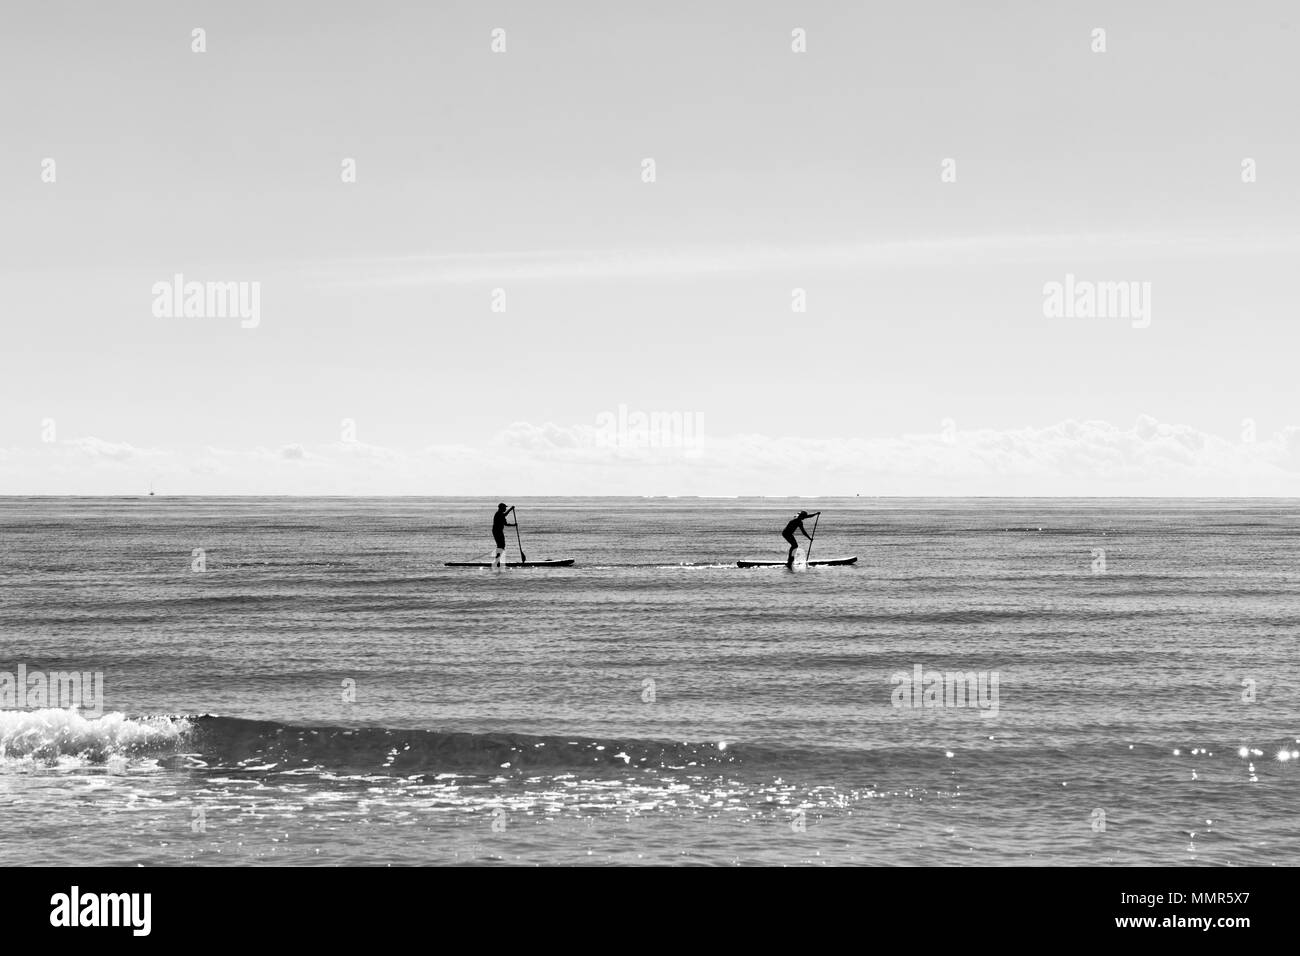 paddle boarding silhouettes in a calm mediterranean sea, black and white photo with free space for text Stock Photo